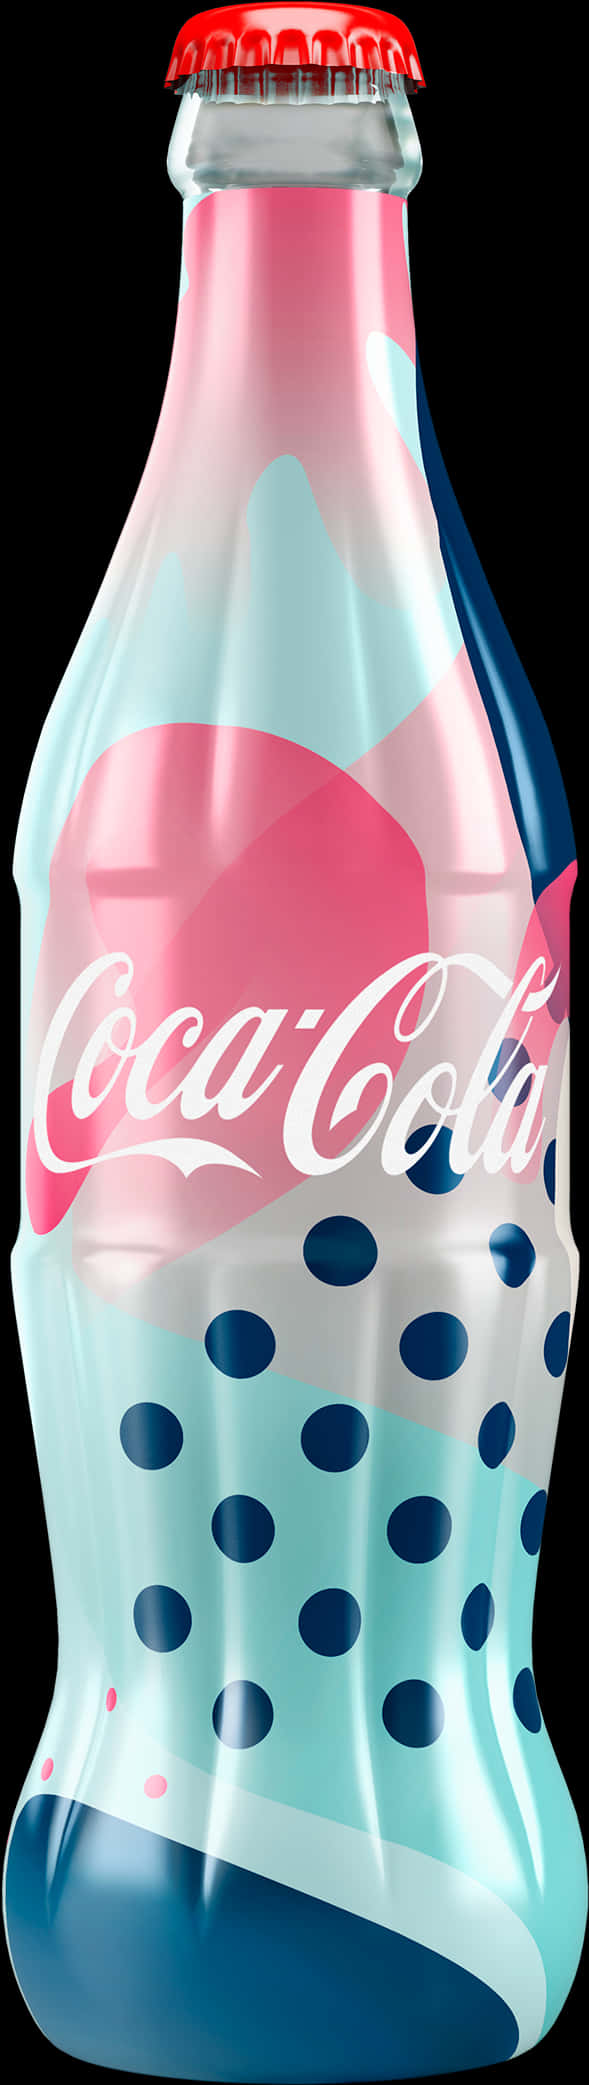 Coca Cola Abstract Bottle Design PNG